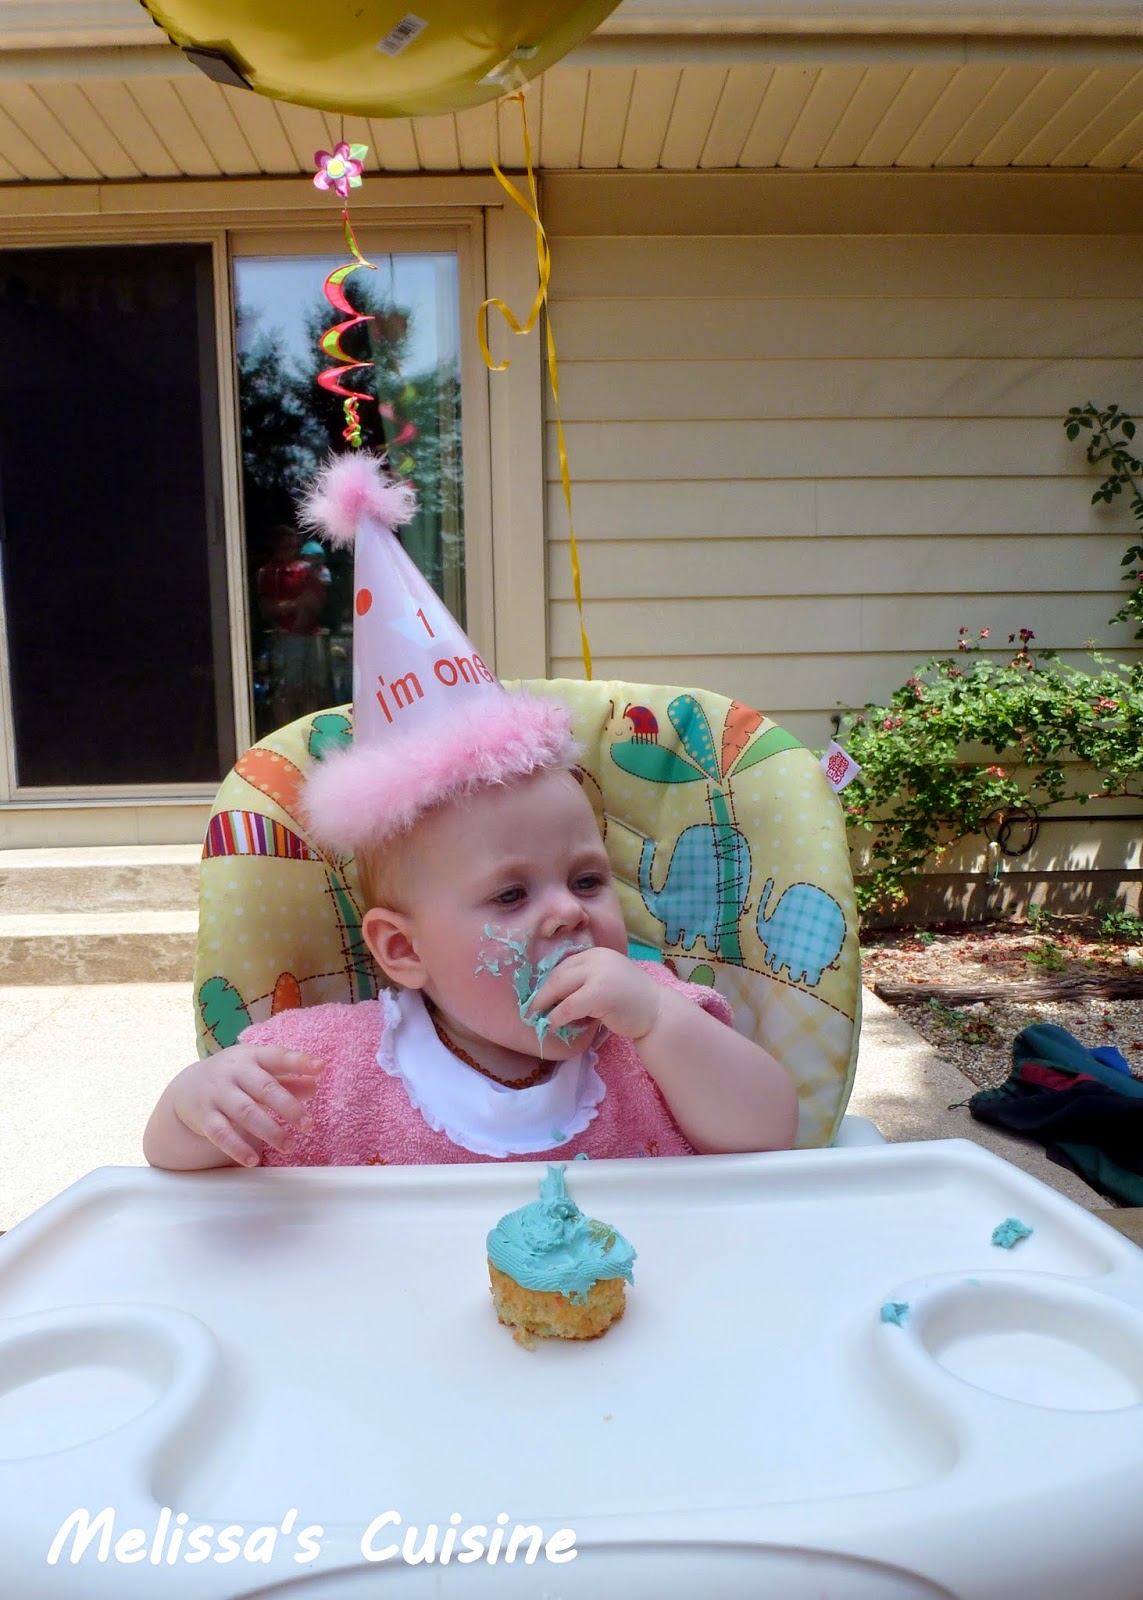 Melissa's Cuisine: Rubber Ducky First Birthday Party